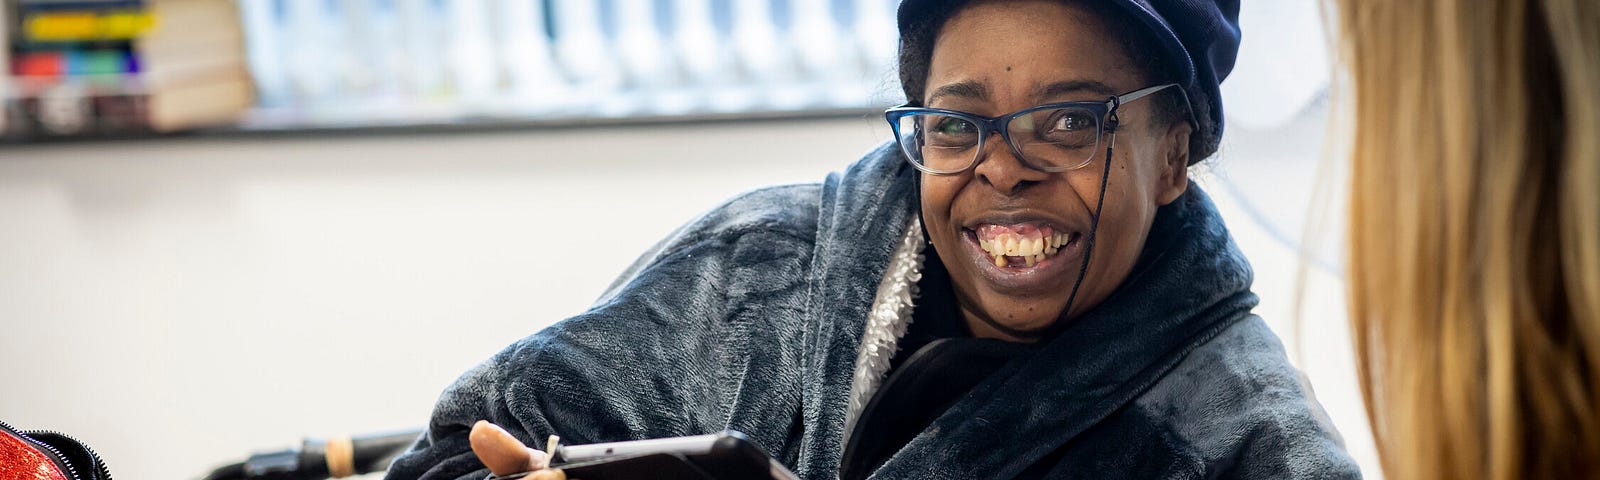 Black woman aged in her fifties smiling and holding a tablet